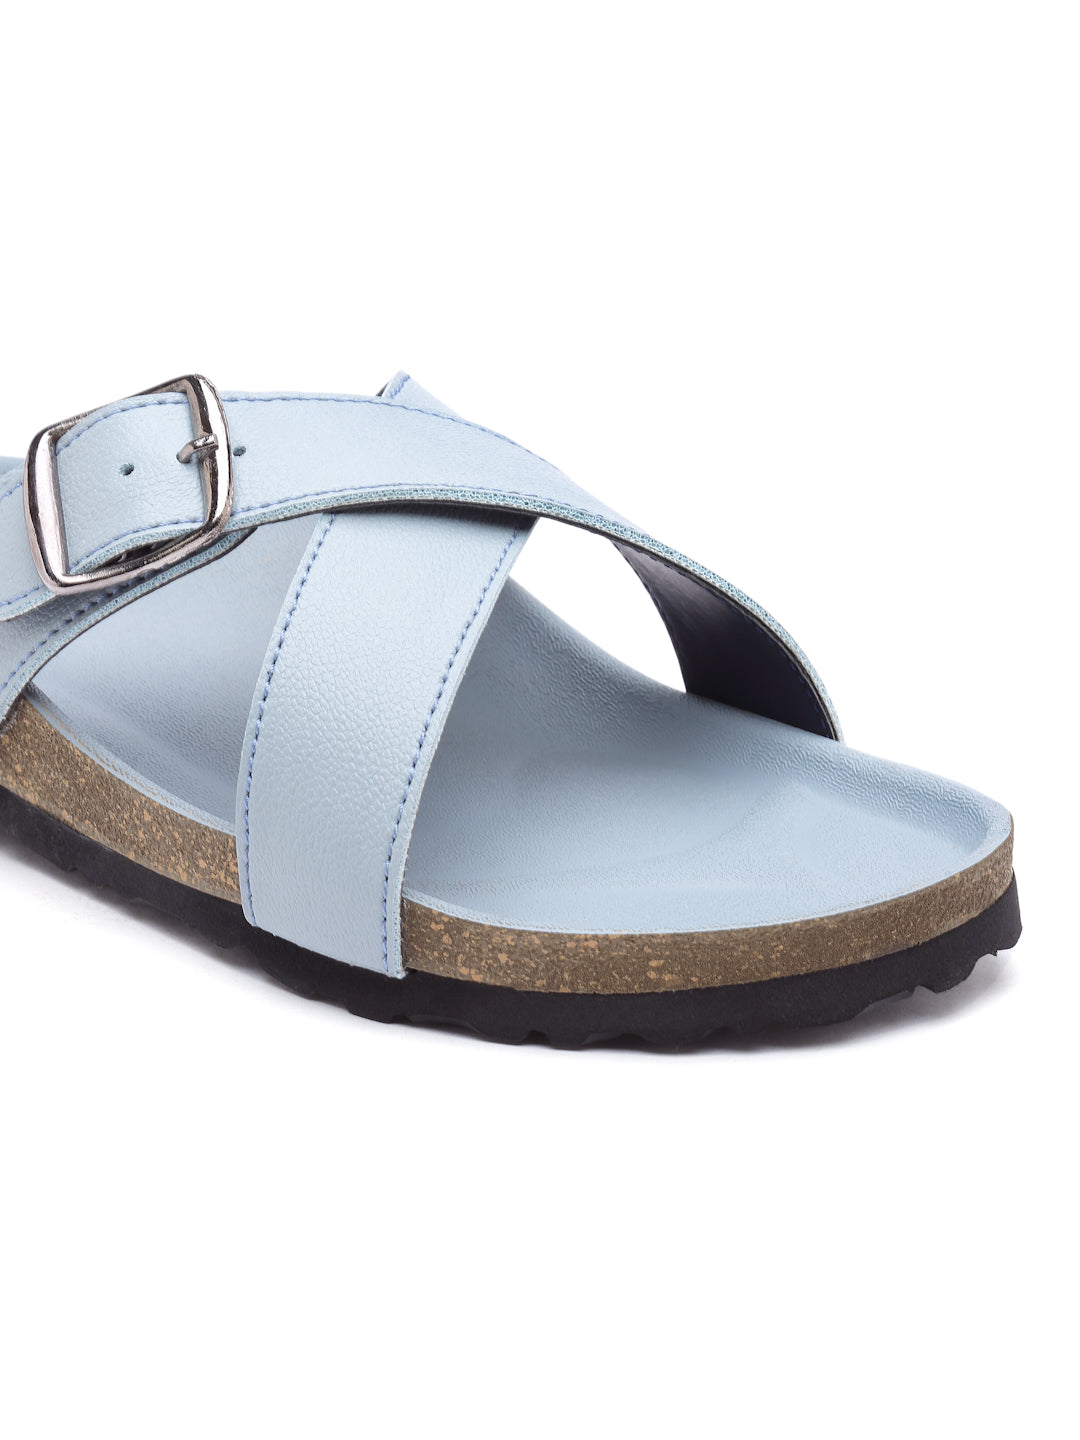 Women's Stylish Powder-Blue Synthetic Leather Casual Sandal